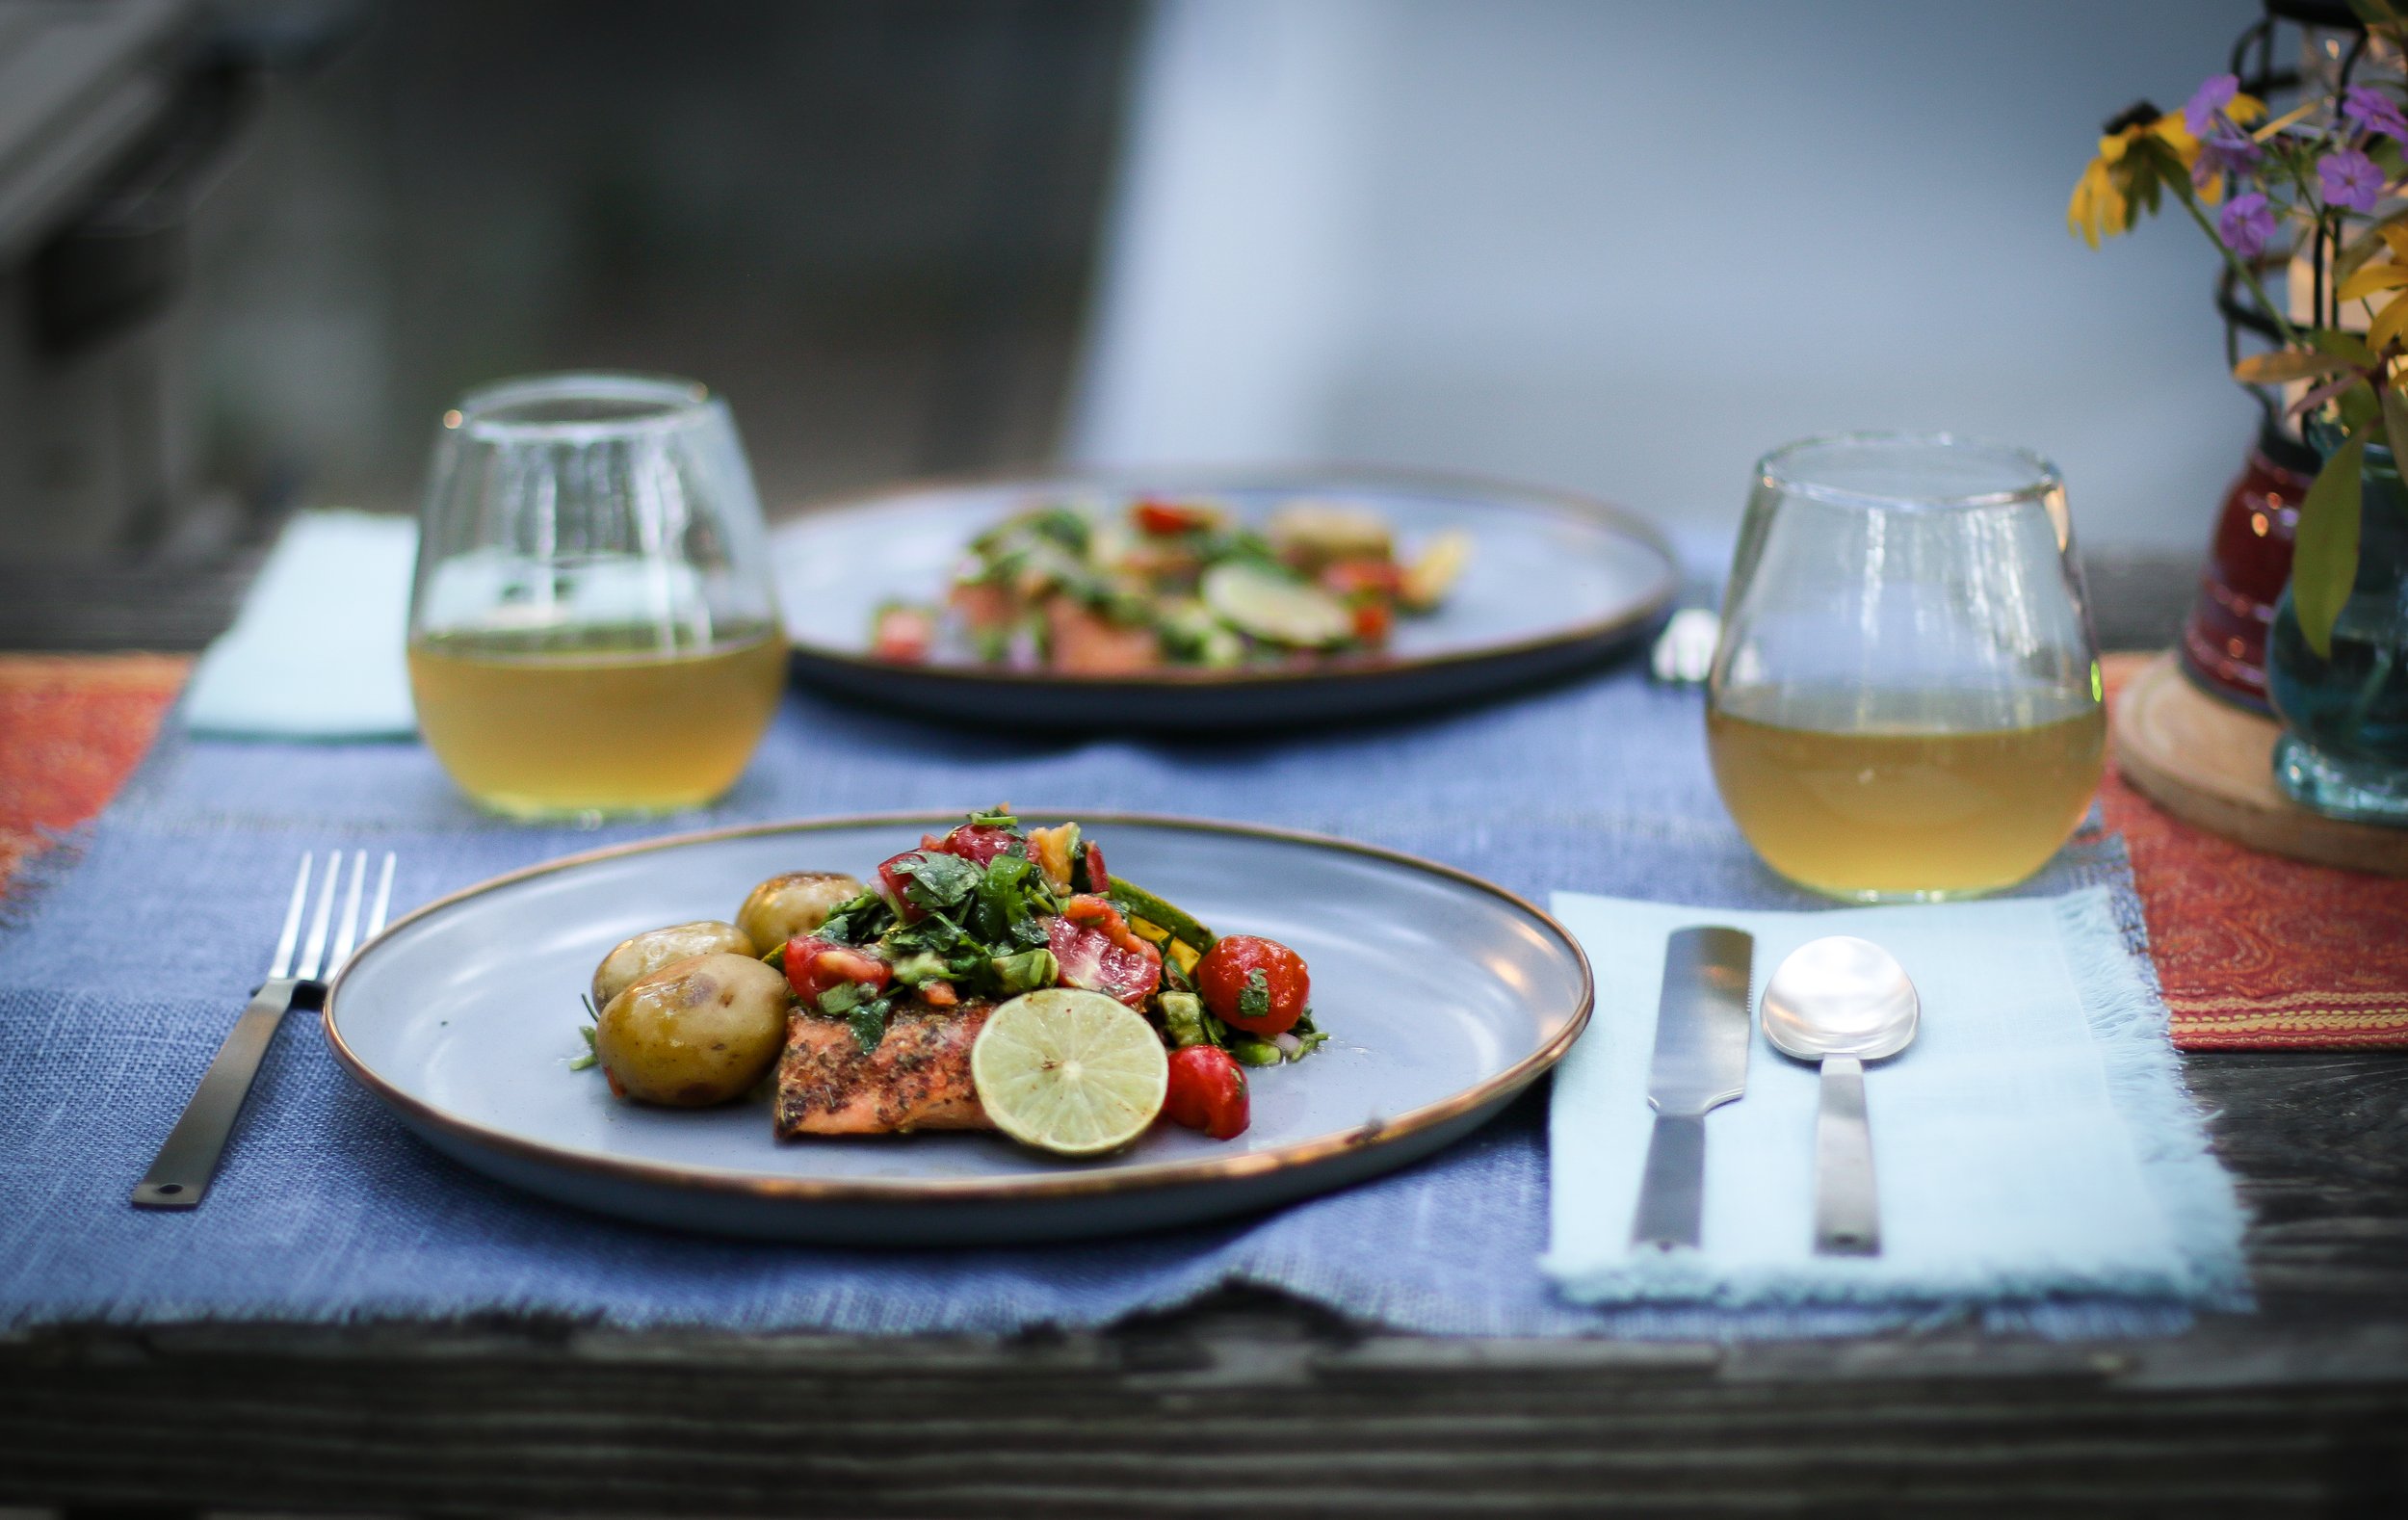 Paprika Lime Salmon with fresh Salsa - A Southern-Inspired Recipe on Plate with Wine PLace Setting.jpg